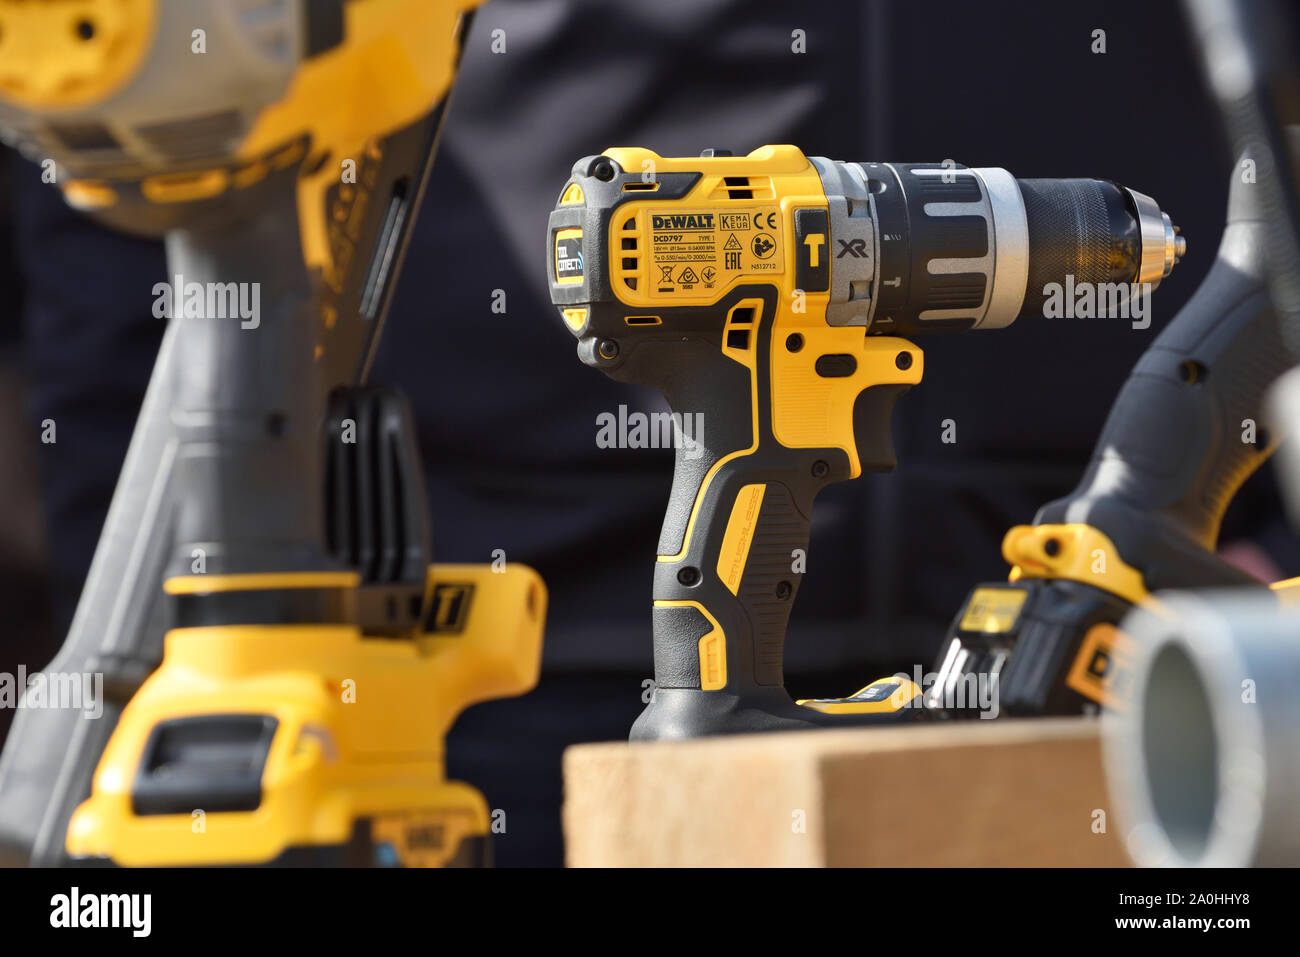 Vilnius, Lithuania - April 25: DeWalt power tools in Vilnius on April 25,  2019. DeWalt is an American worldwide brand of power tools and hand tools  fo Stock Photo - Alamy